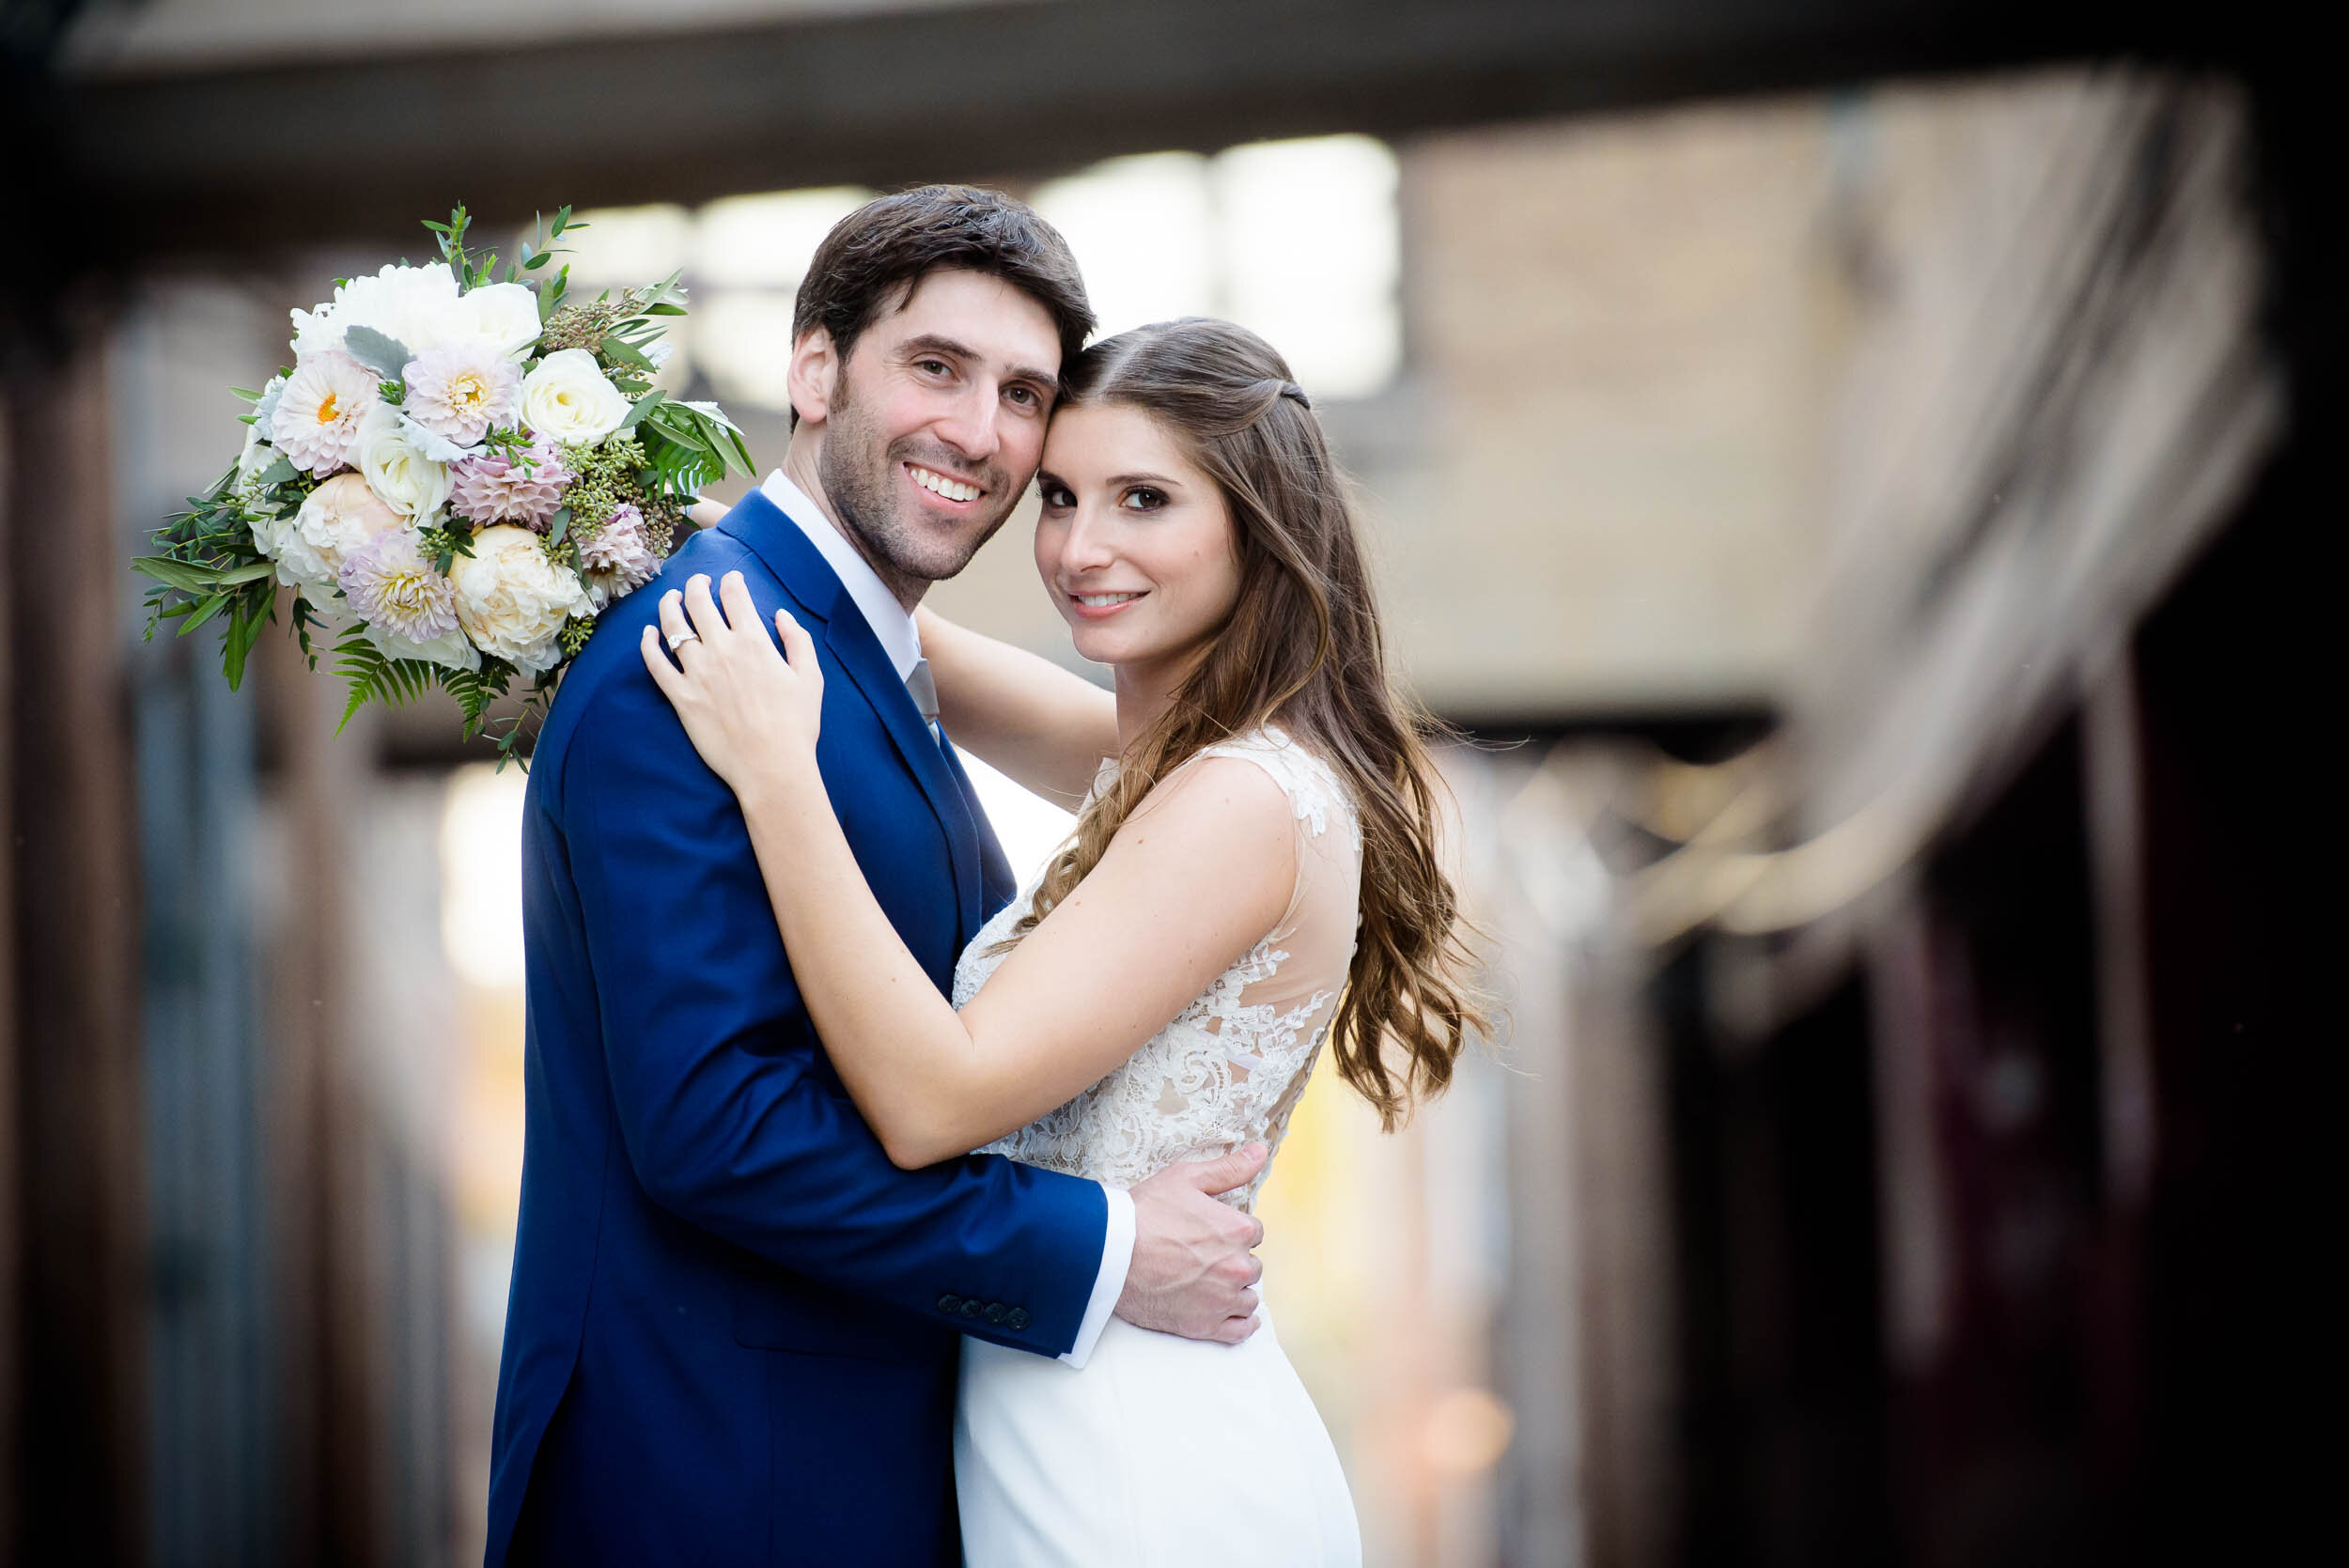 Bride and groom wedding day portrait: Ravenswood Event Center Chicago wedding captured by J. Brown Photography.  